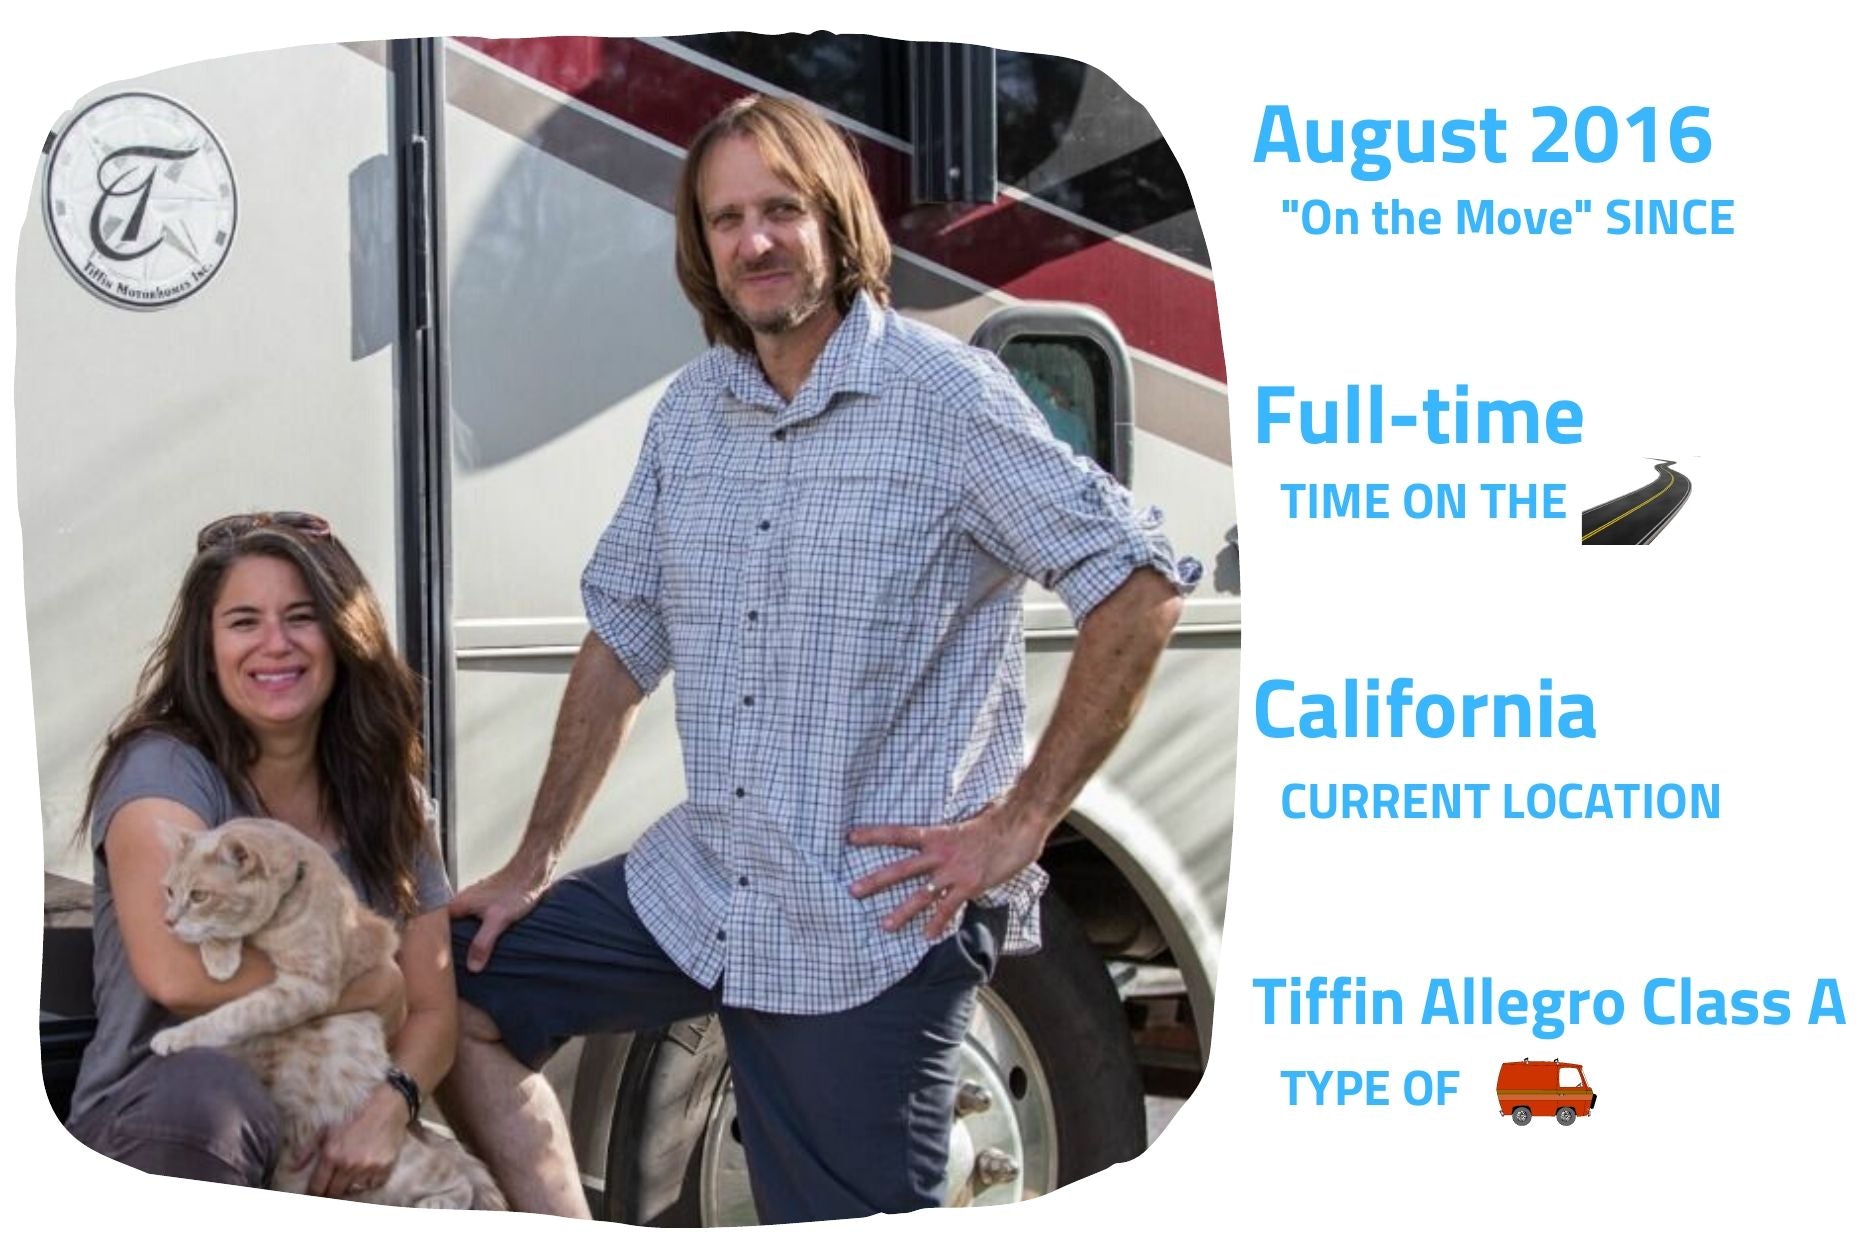 Camille and Bryce give an interview with Maca about their Full-time RVing experience